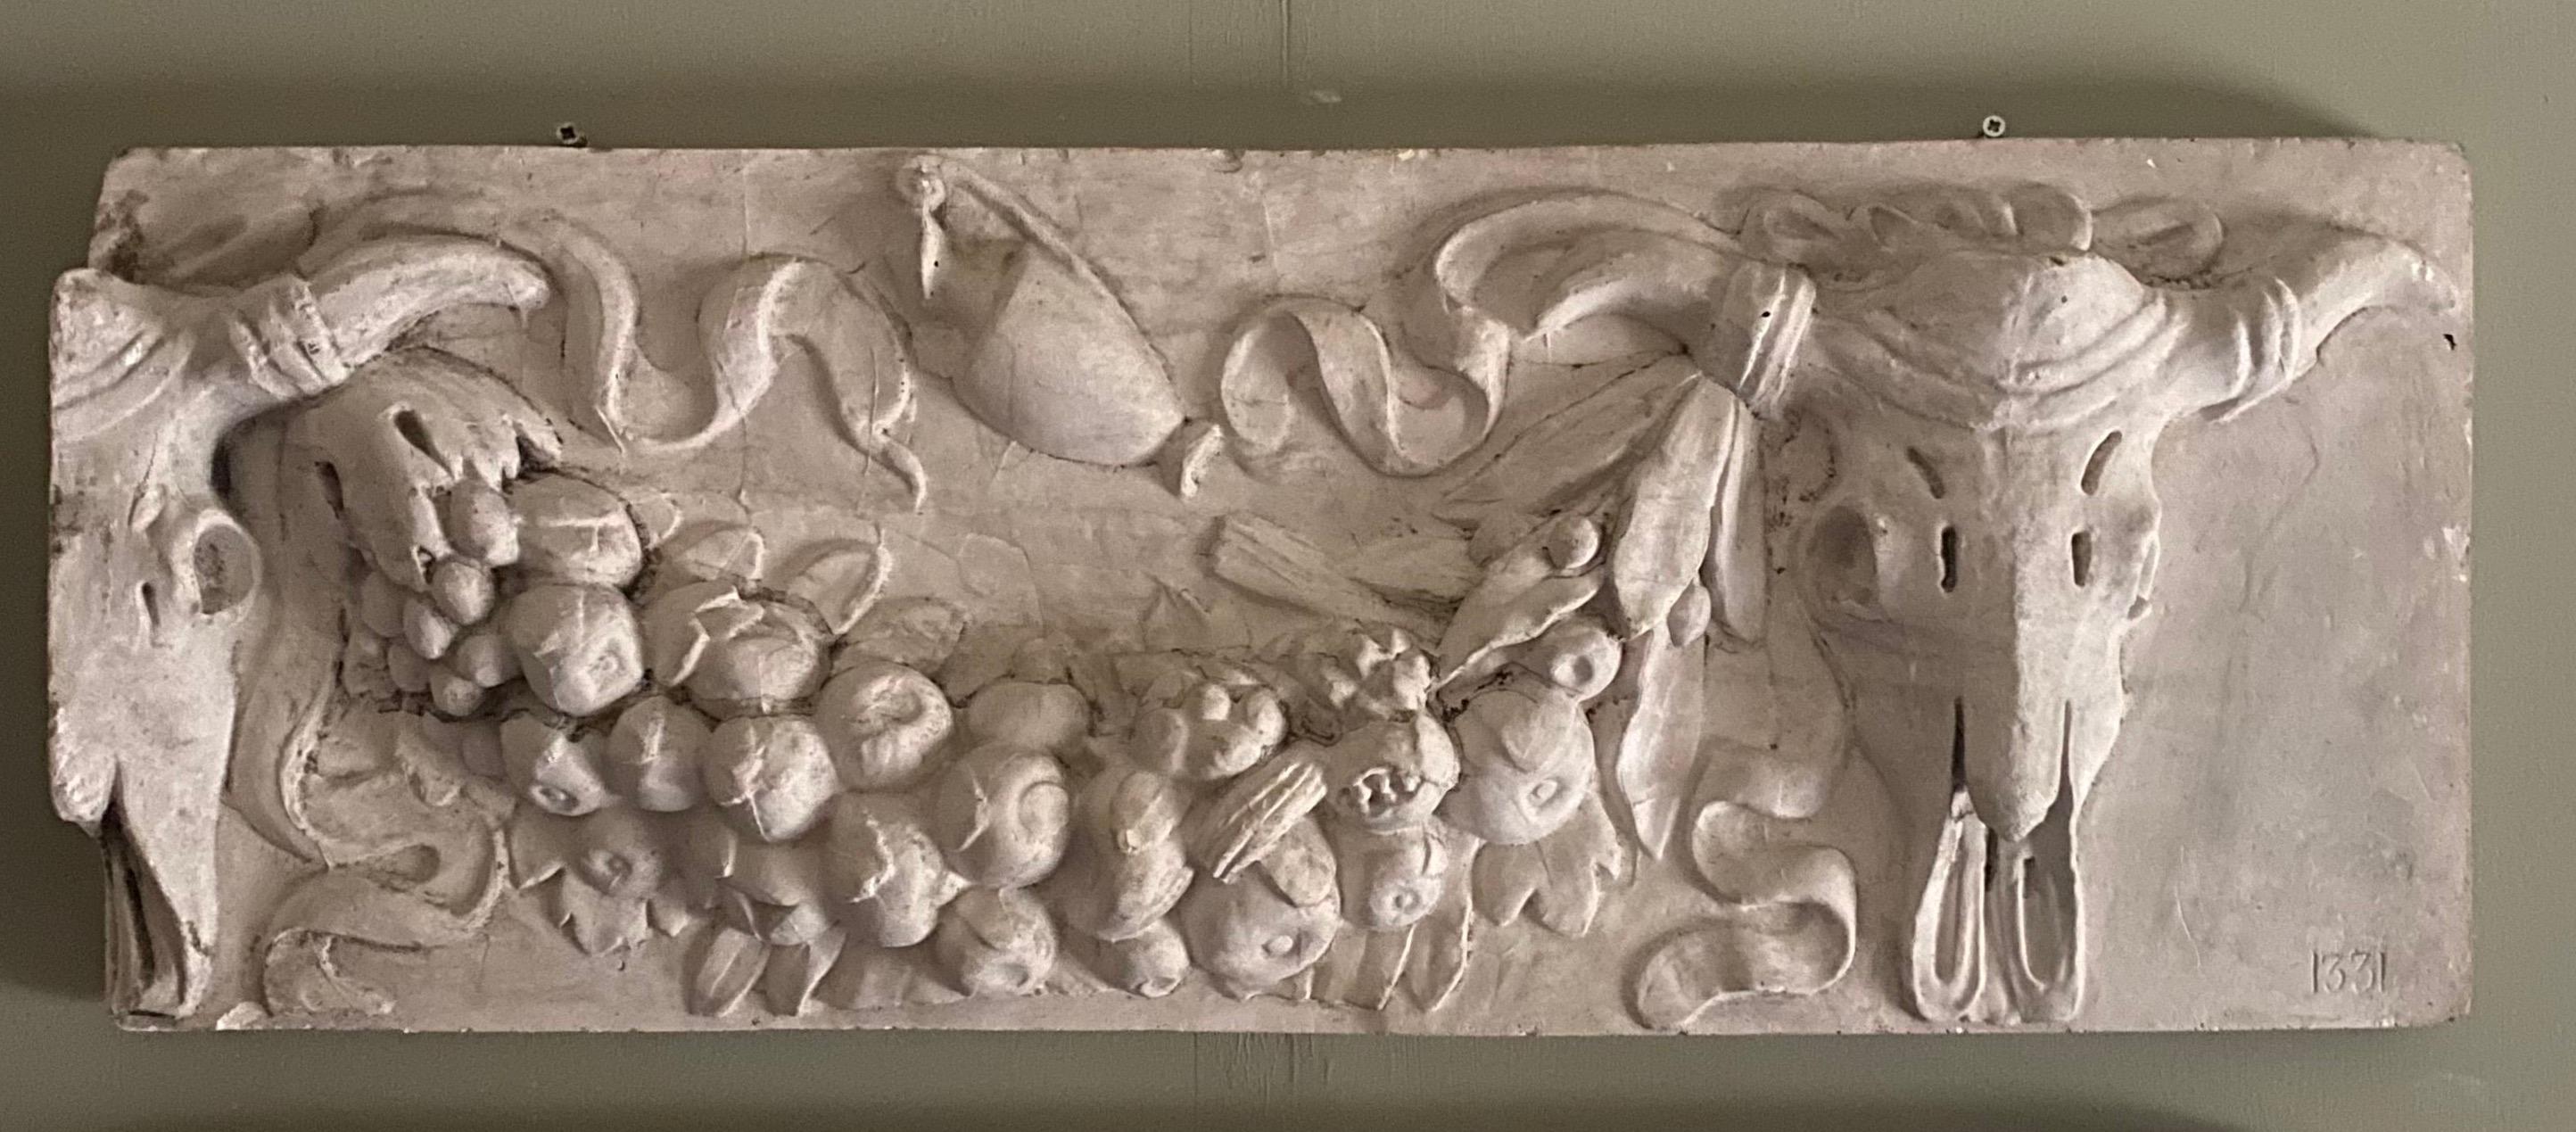 A wonderfully detailed and well cast Bucranium plaster frieze featuring Ox skulls and garlands.

To the lower right is the number 1331 which is more than likely a museum reference. The piece is in very good condition with natural ageing.